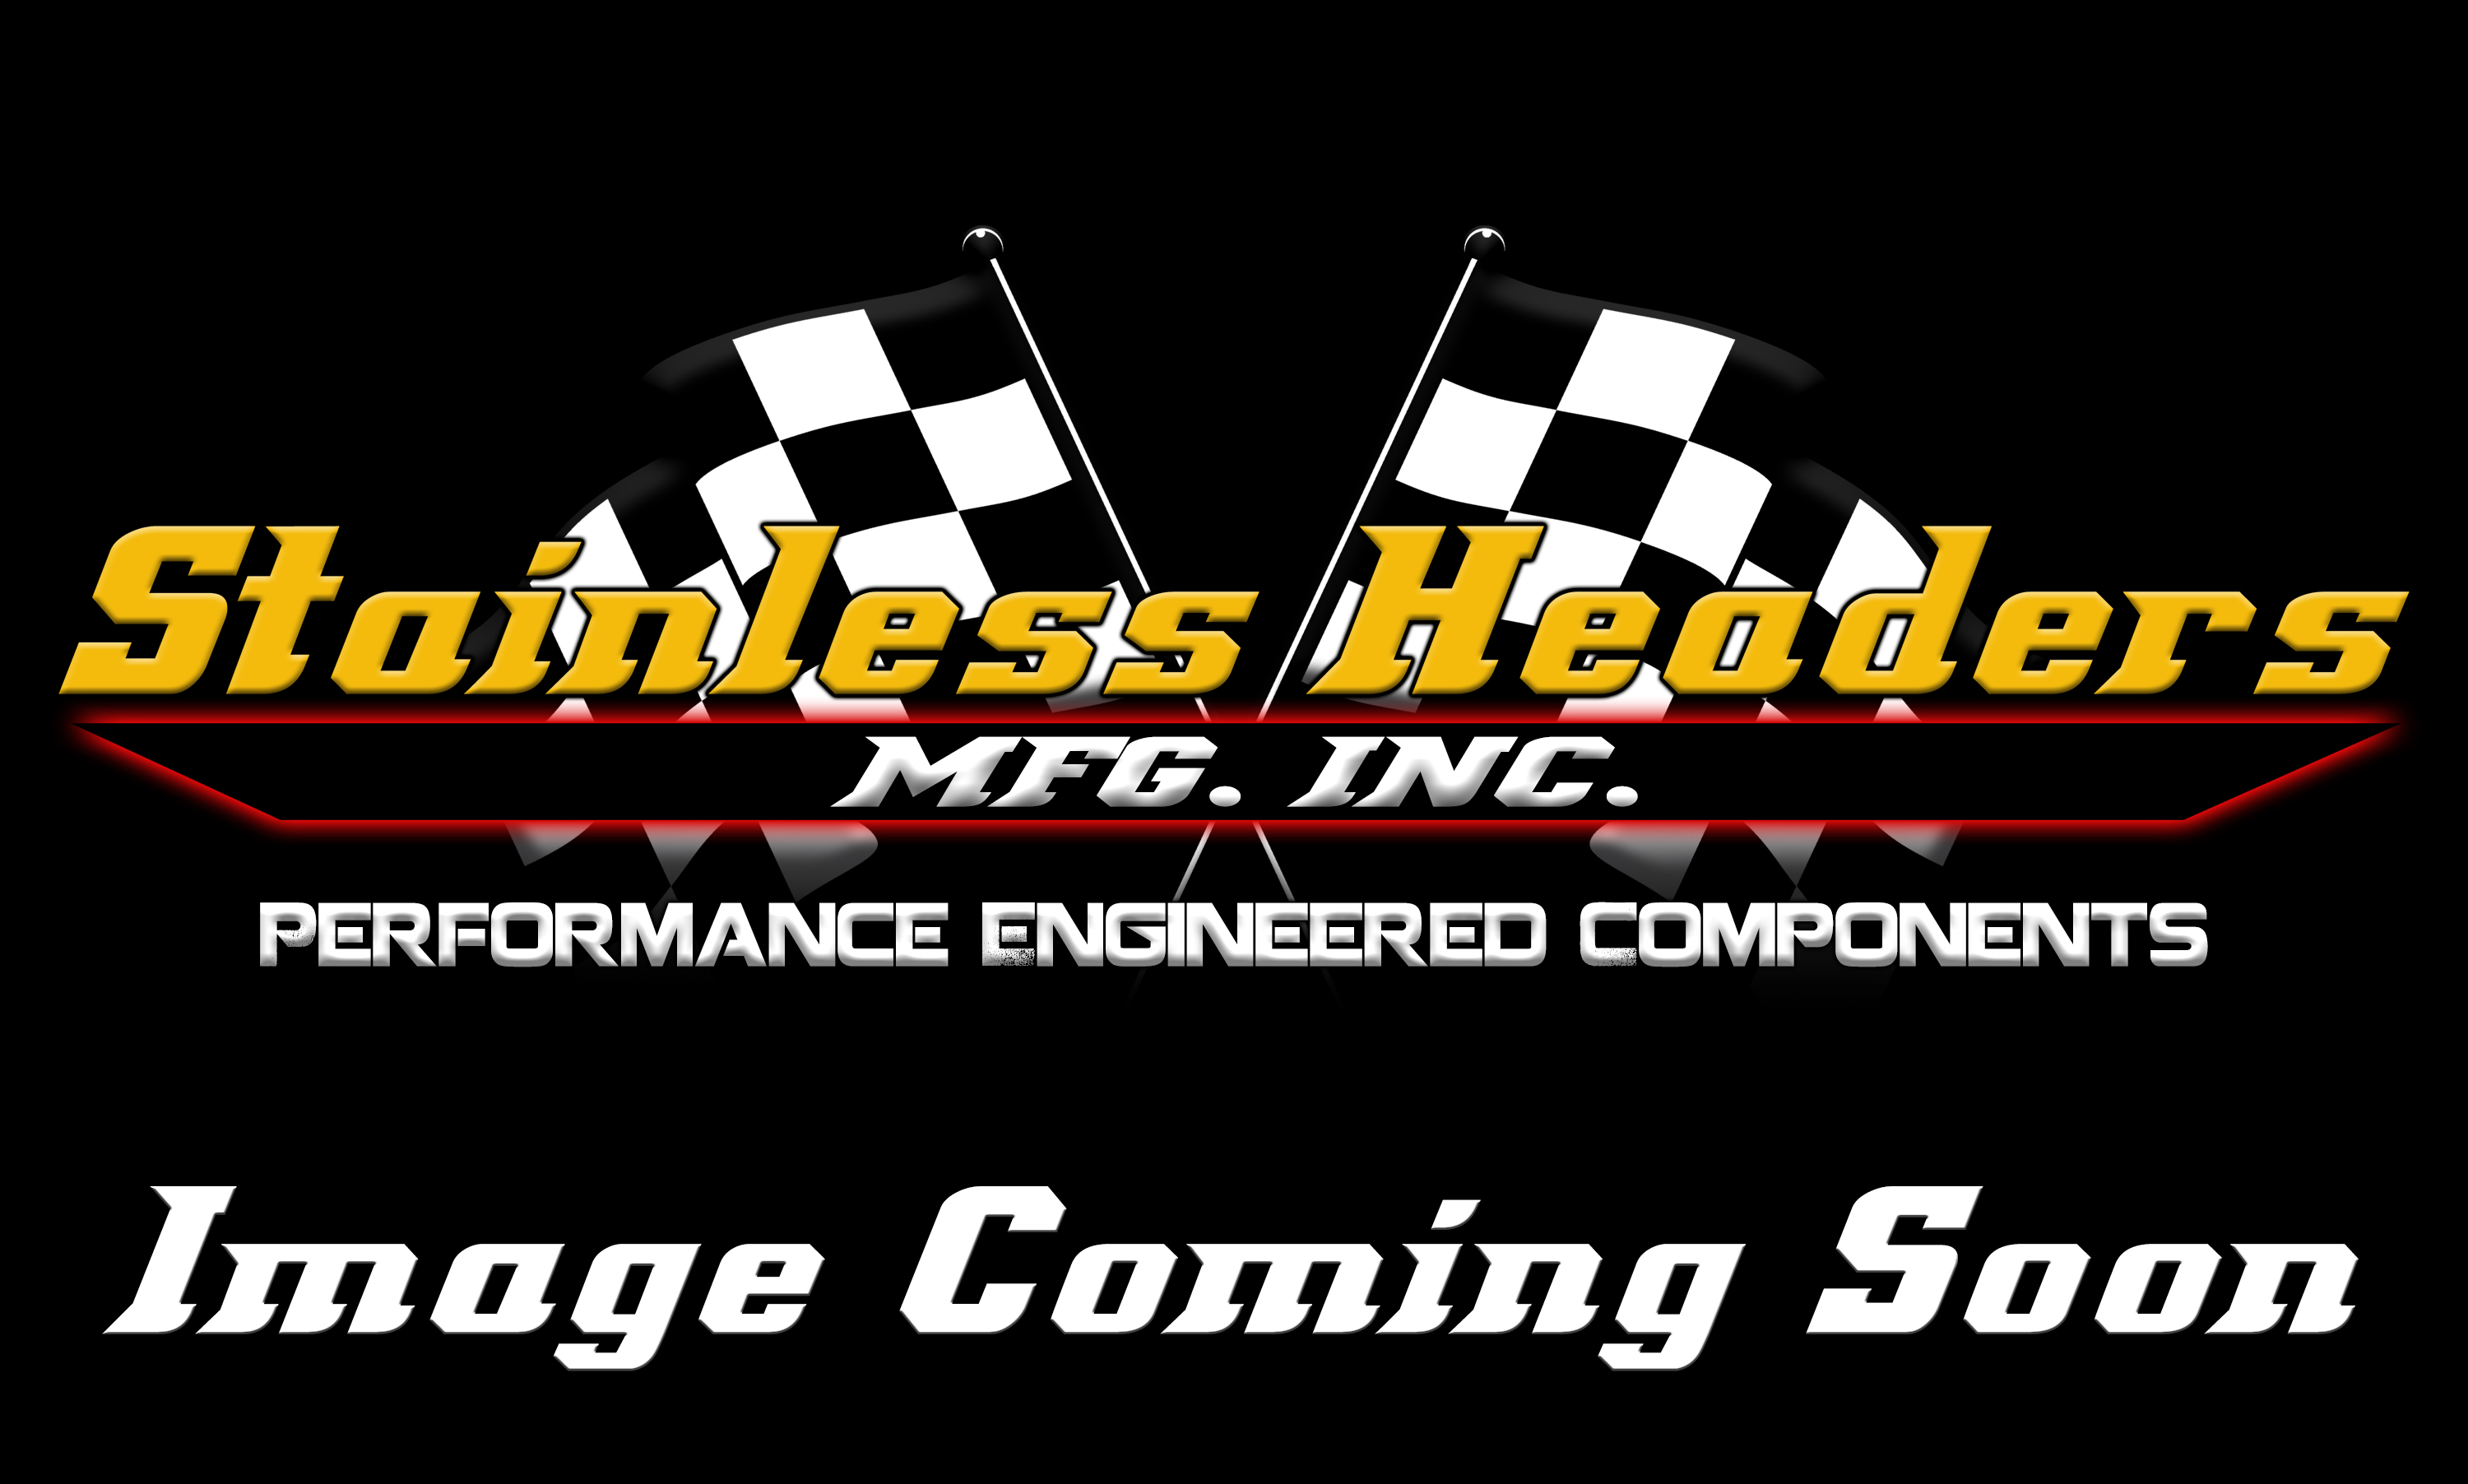 Stainless Headers Image Coming Soon